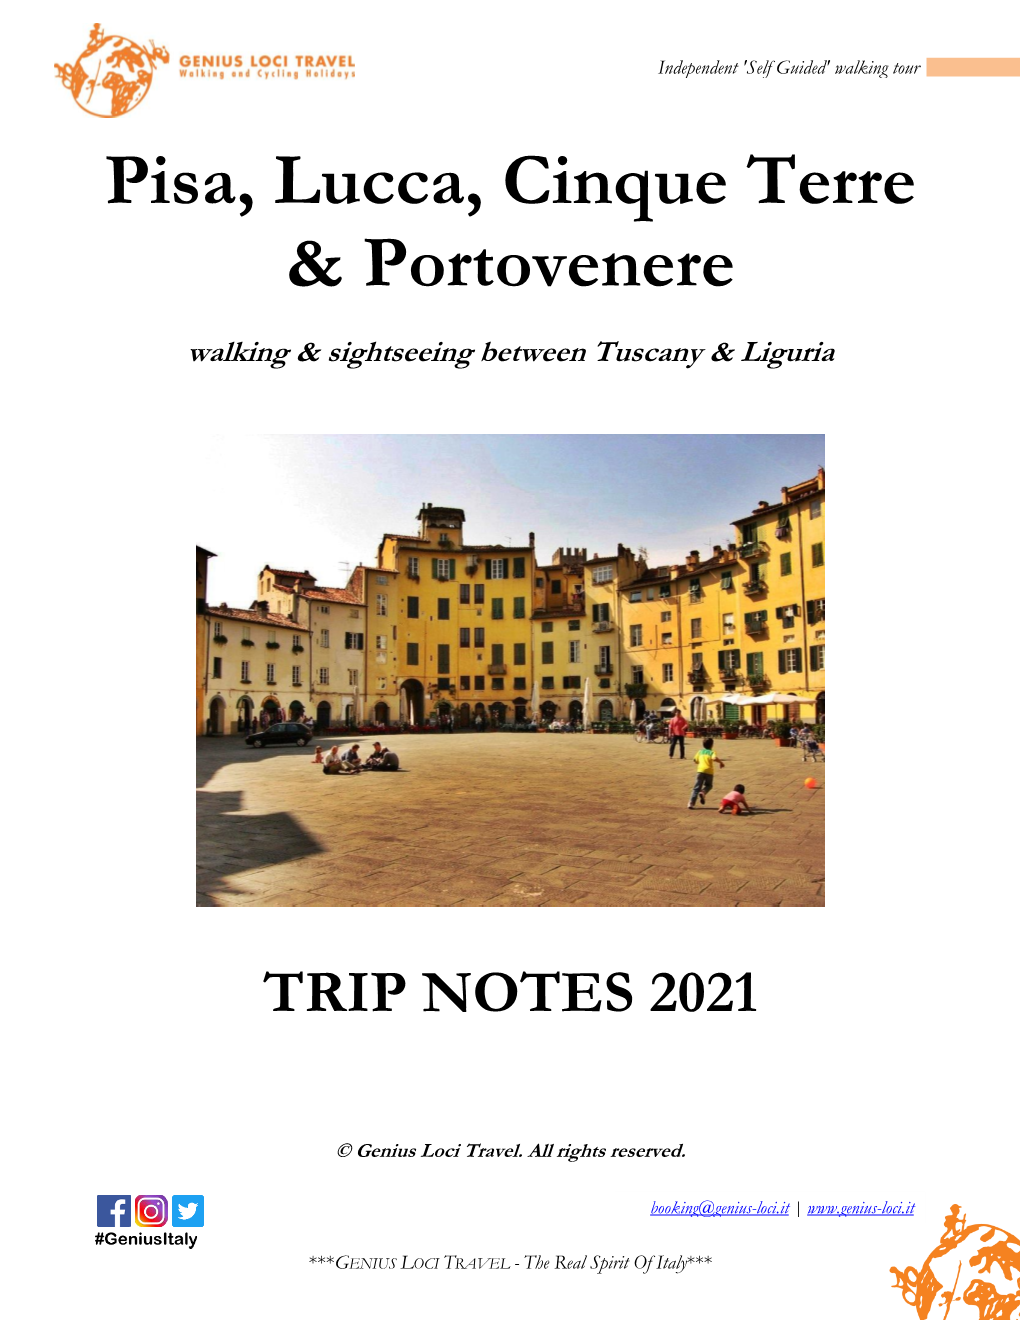 Download Detailed Trip Notes